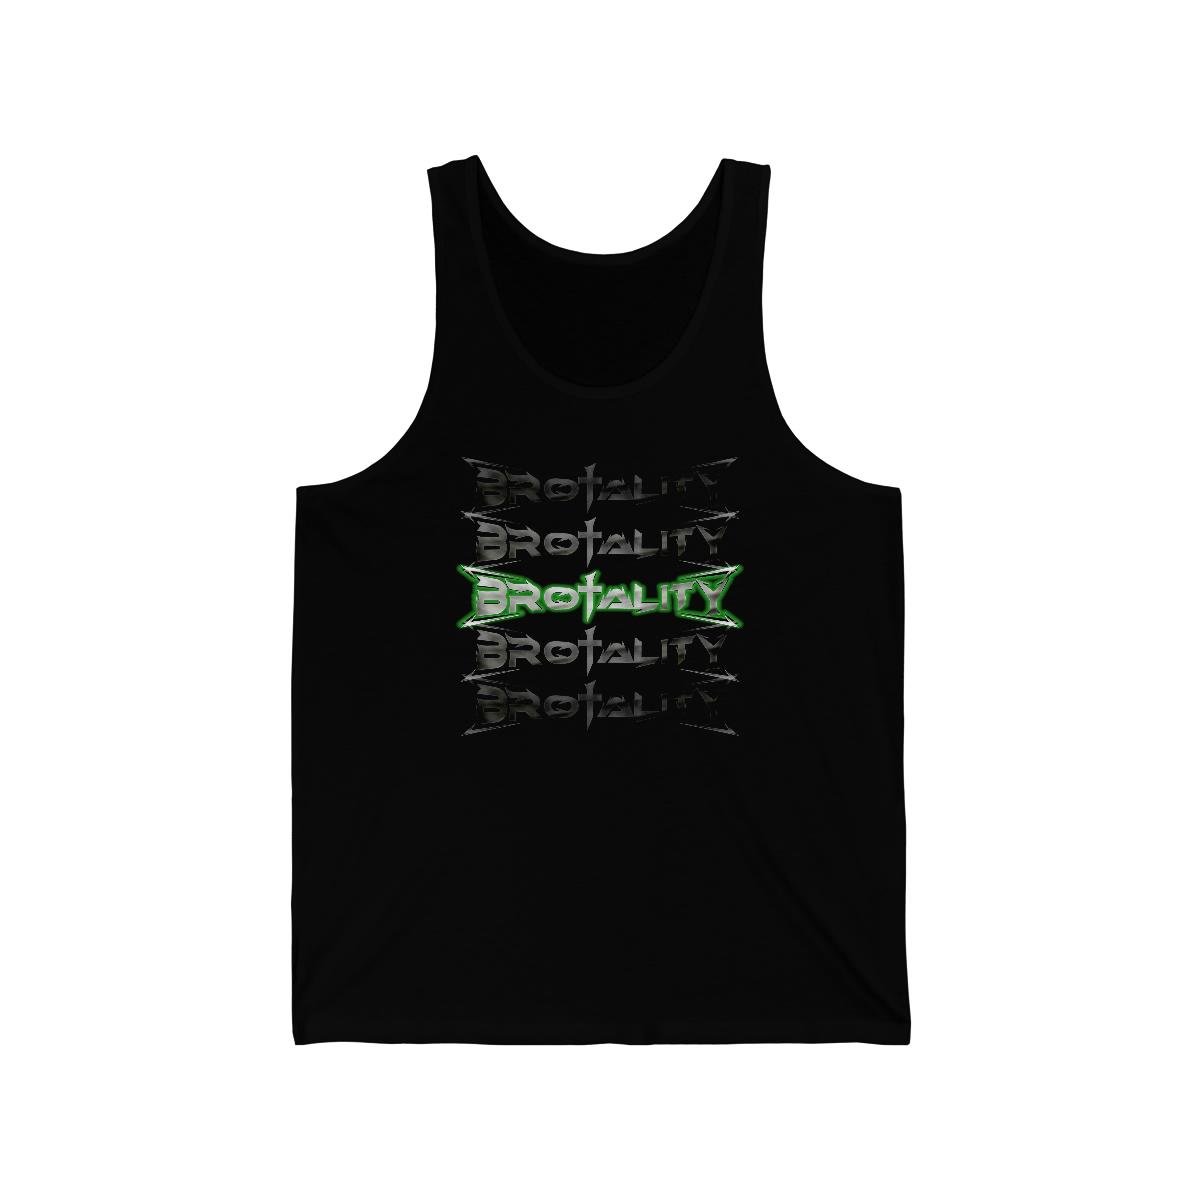 Brotality Stacked Logos Unisex Jersey Tank